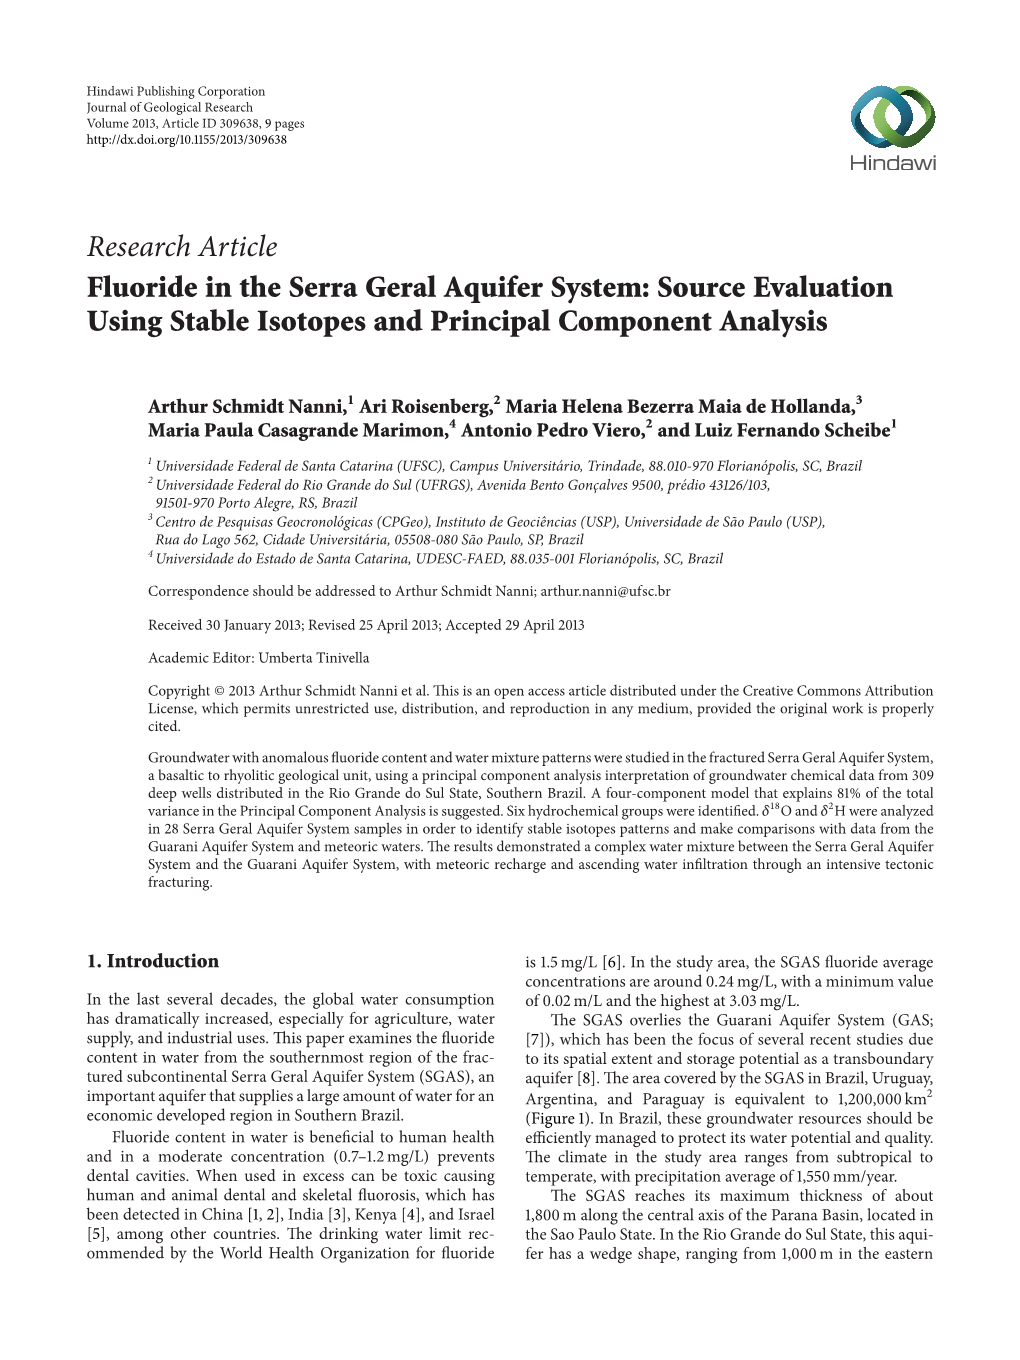 Fluoride in the Serra Geral Aquifer System: Source Evaluation Using Stable Isotopes and Principal Component Analysis